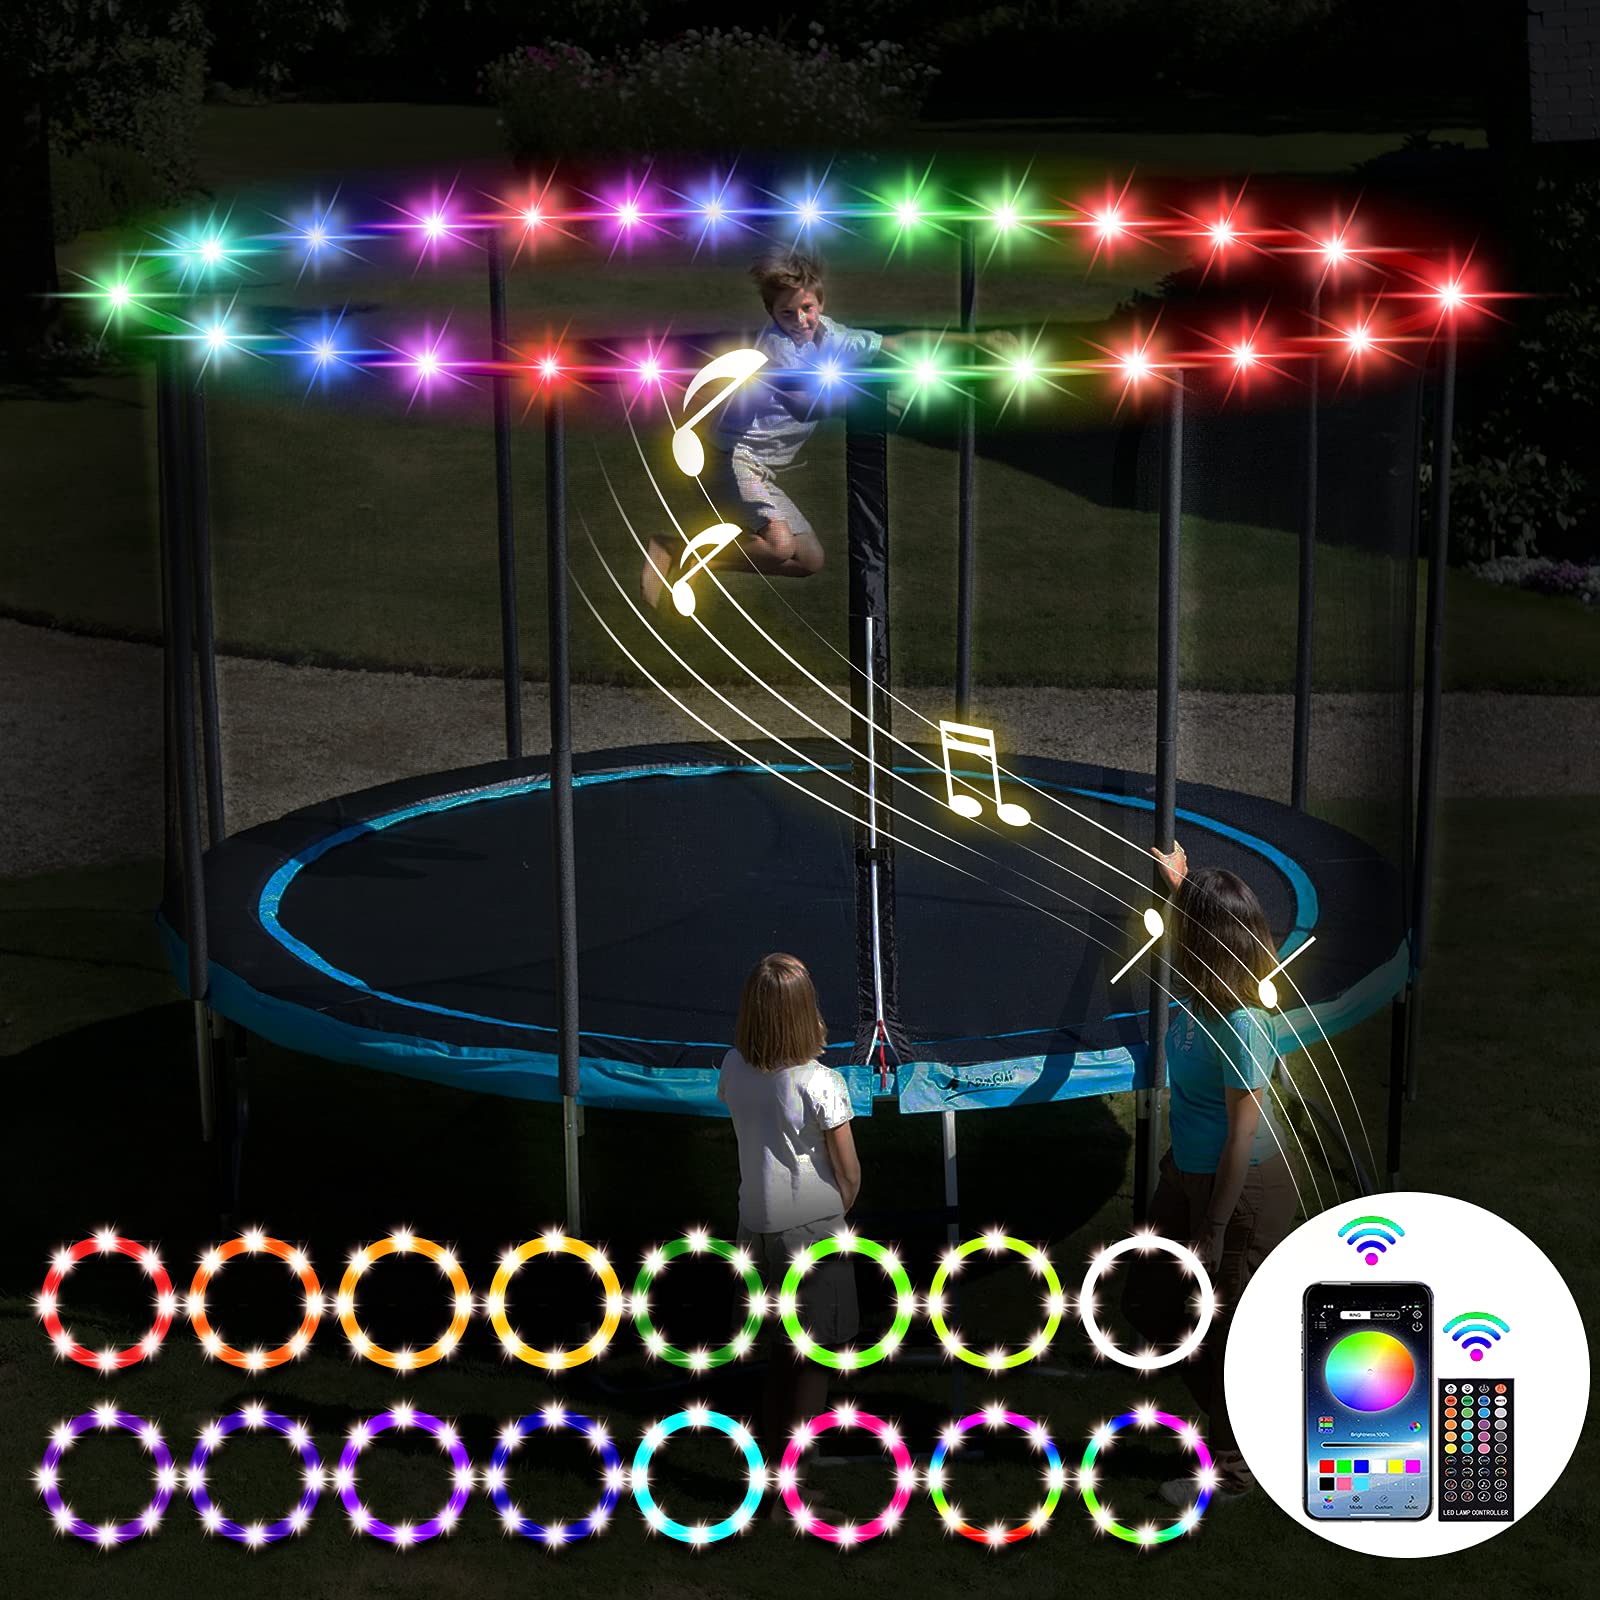 SUVEUS 52Ft Trampoline Lights, Waterproof LED Lights for 16Ft 15Ft 14Ft 12Ft 10Ft Trampoline, 16 colors change with Remote and A